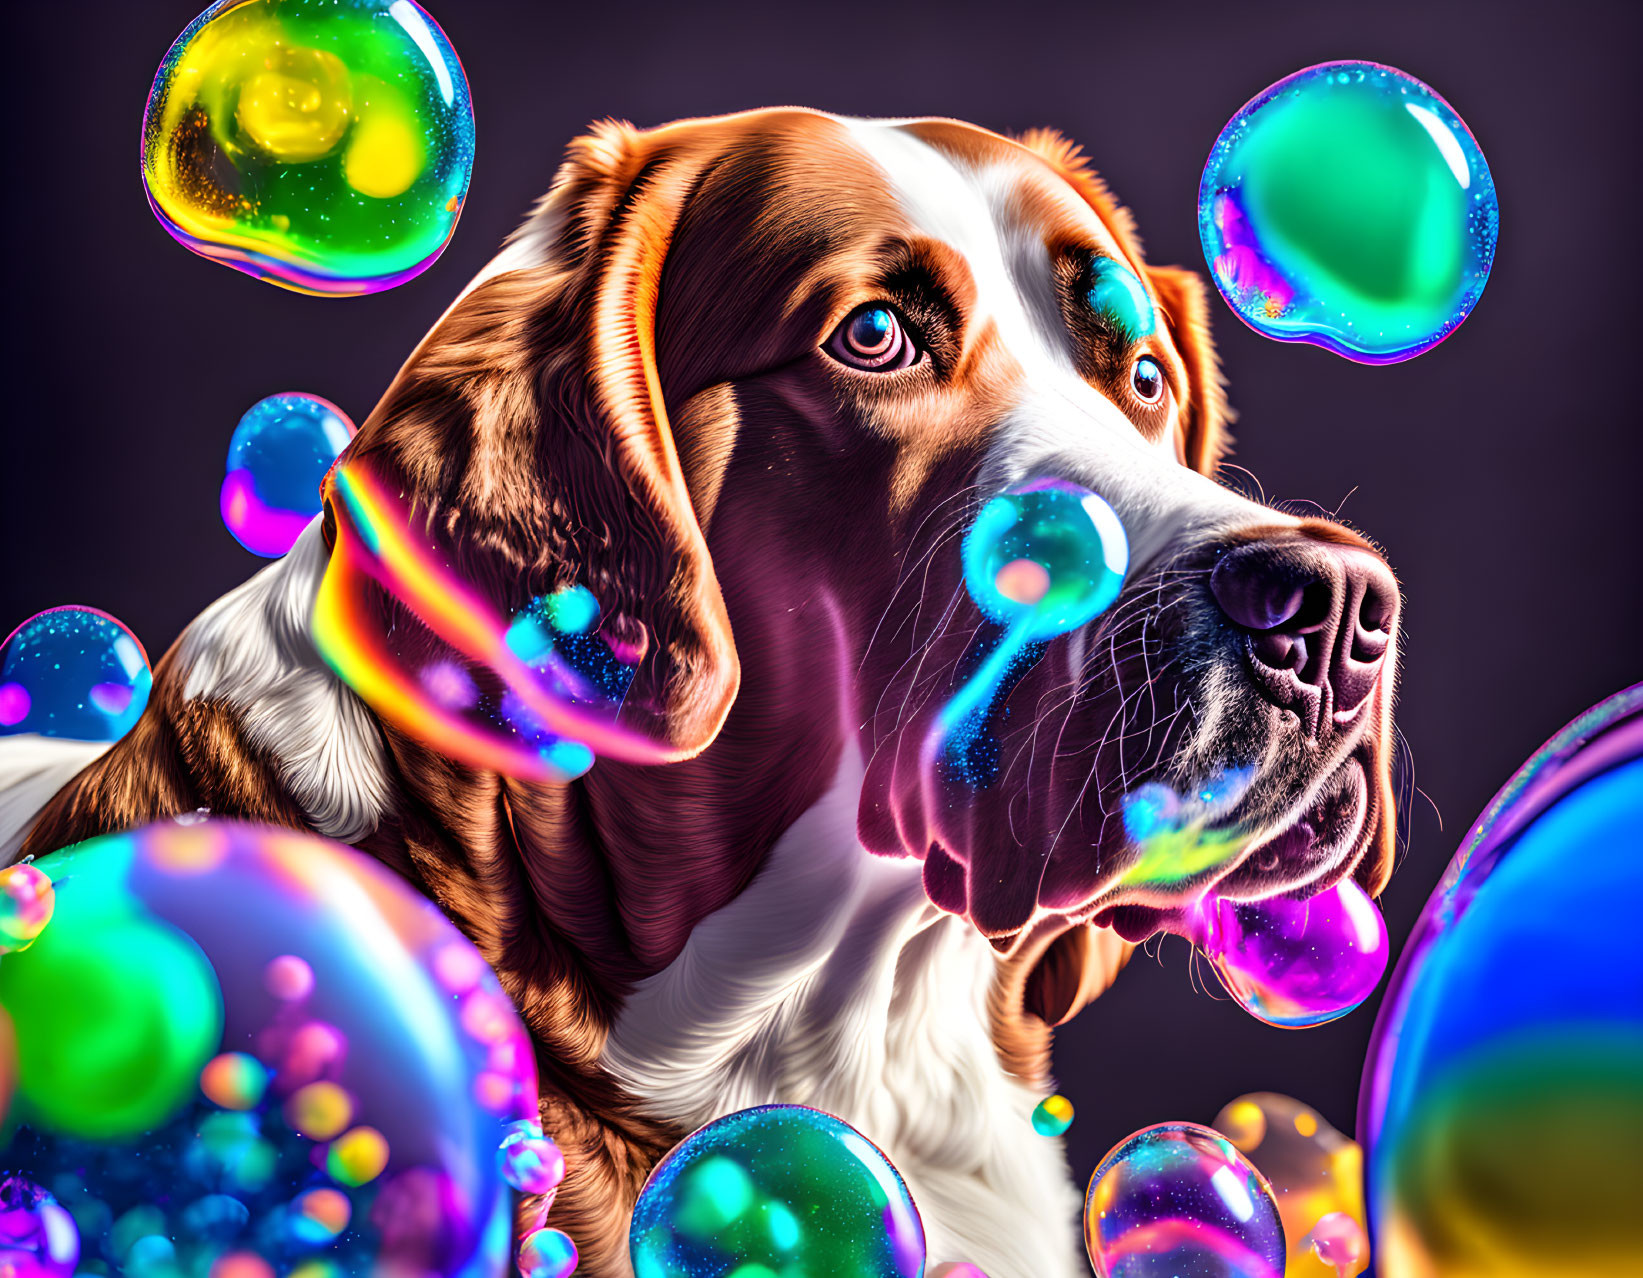 Colorful Beagle Dog Surrounded by Iridescent Bubbles on Dark Background